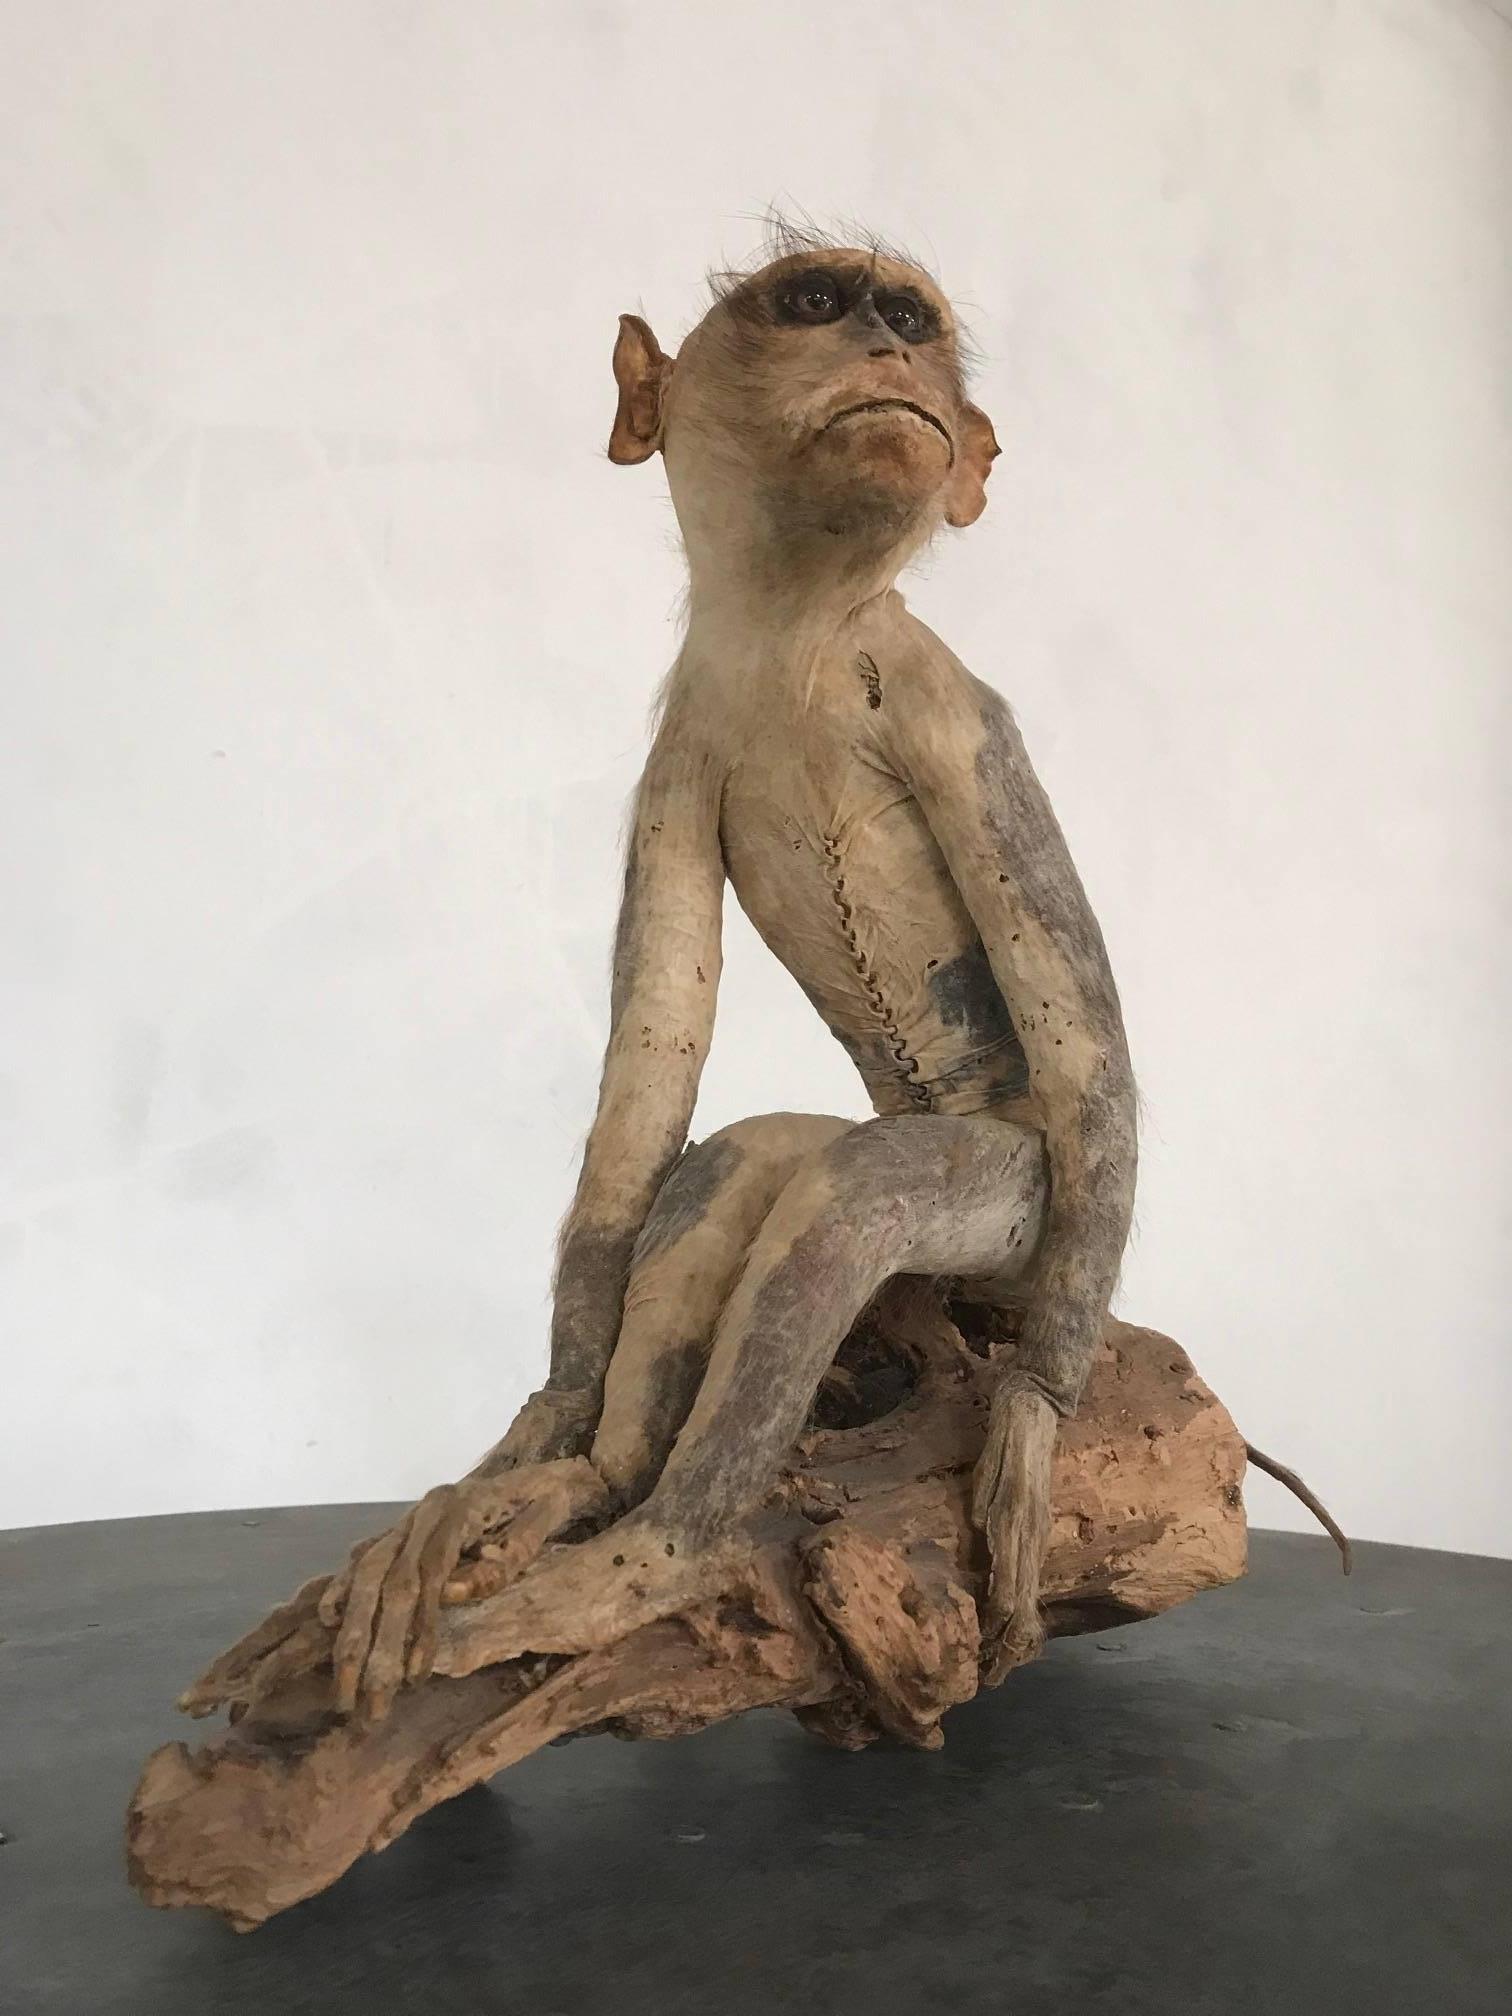 English 19th Century Victorian Stuffed Macaque Monkey Taxidermy Collectible Curiosity